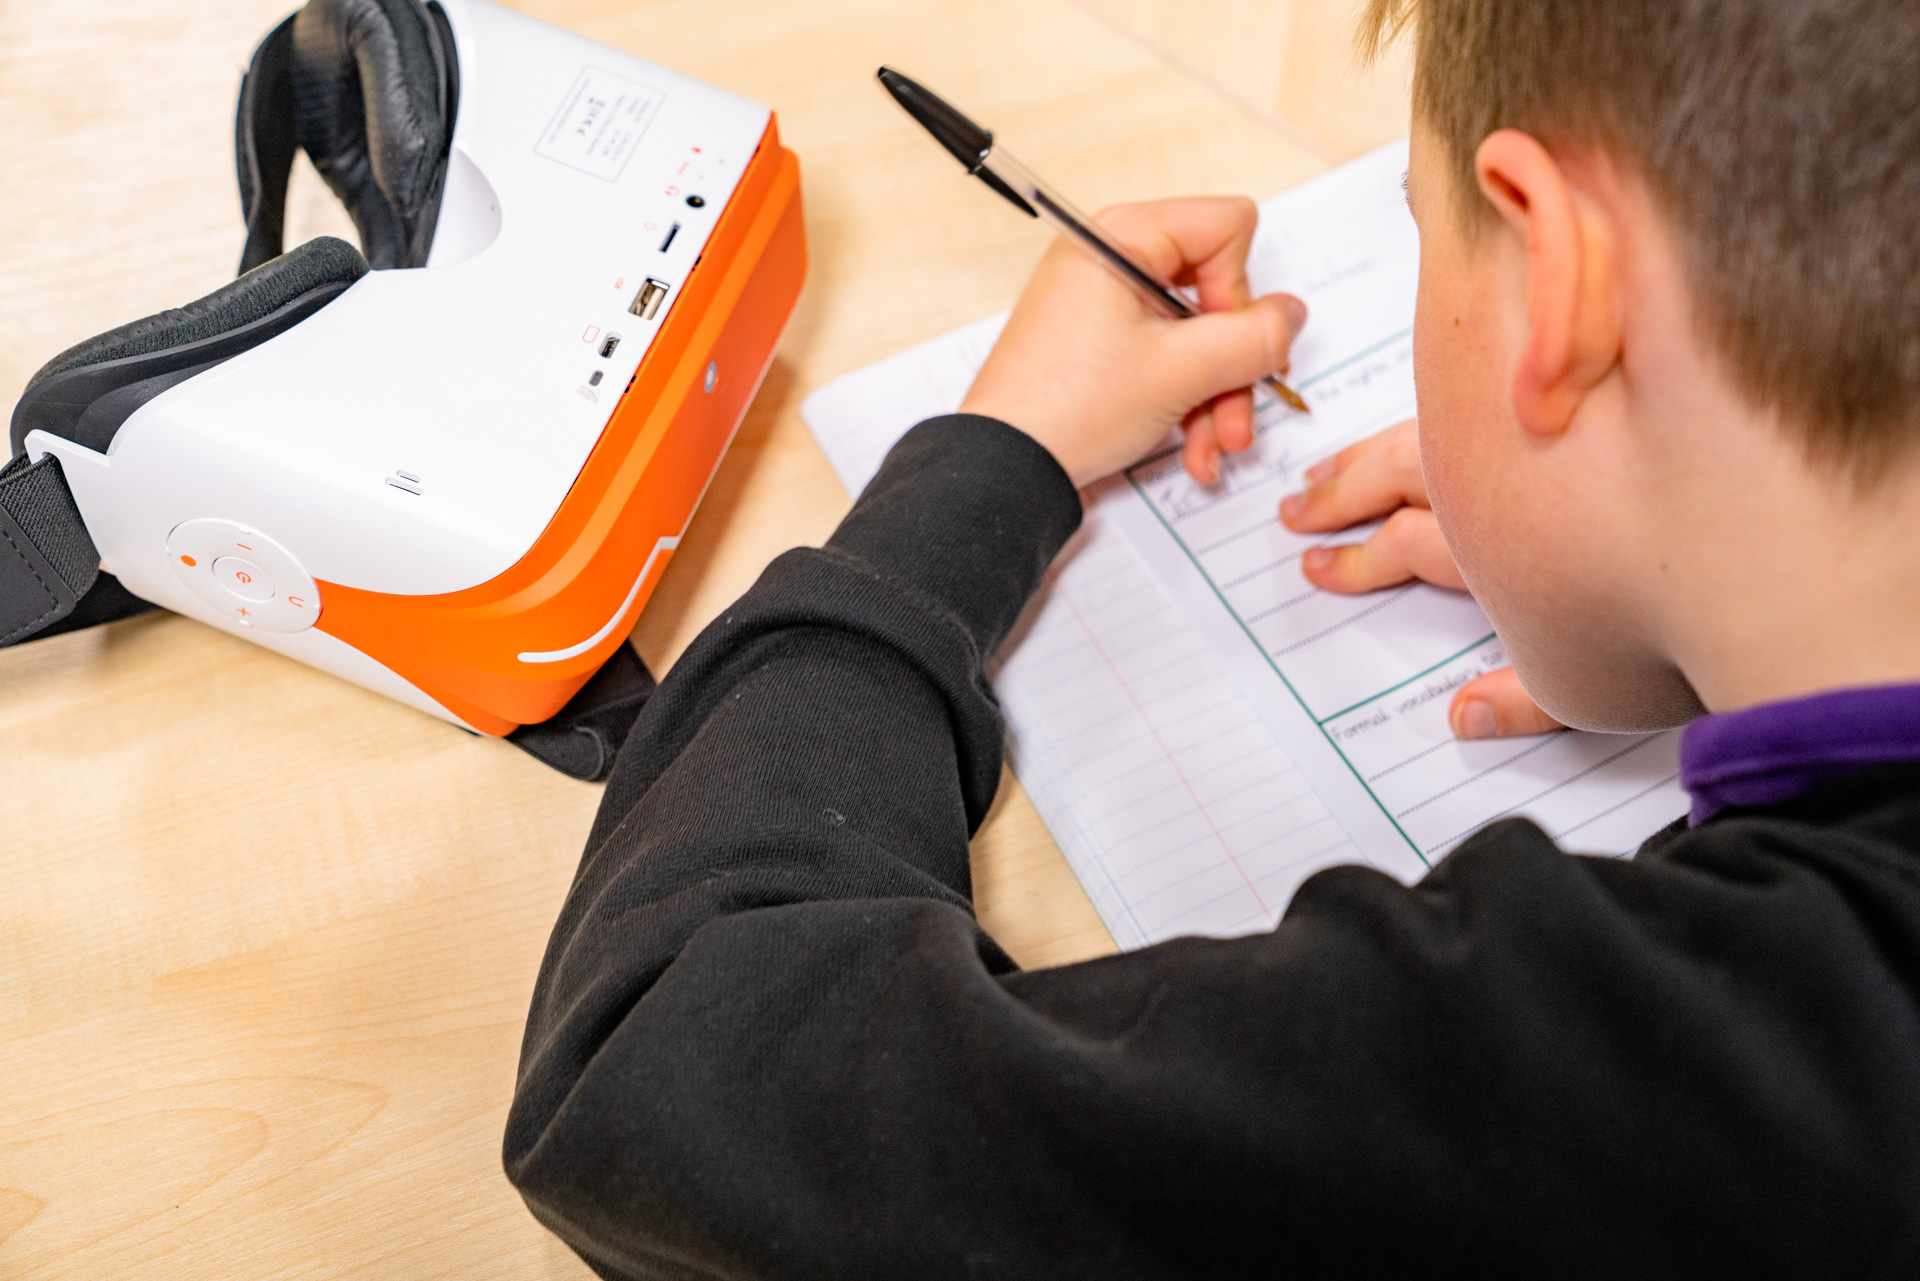 A child with a VR headset writing.